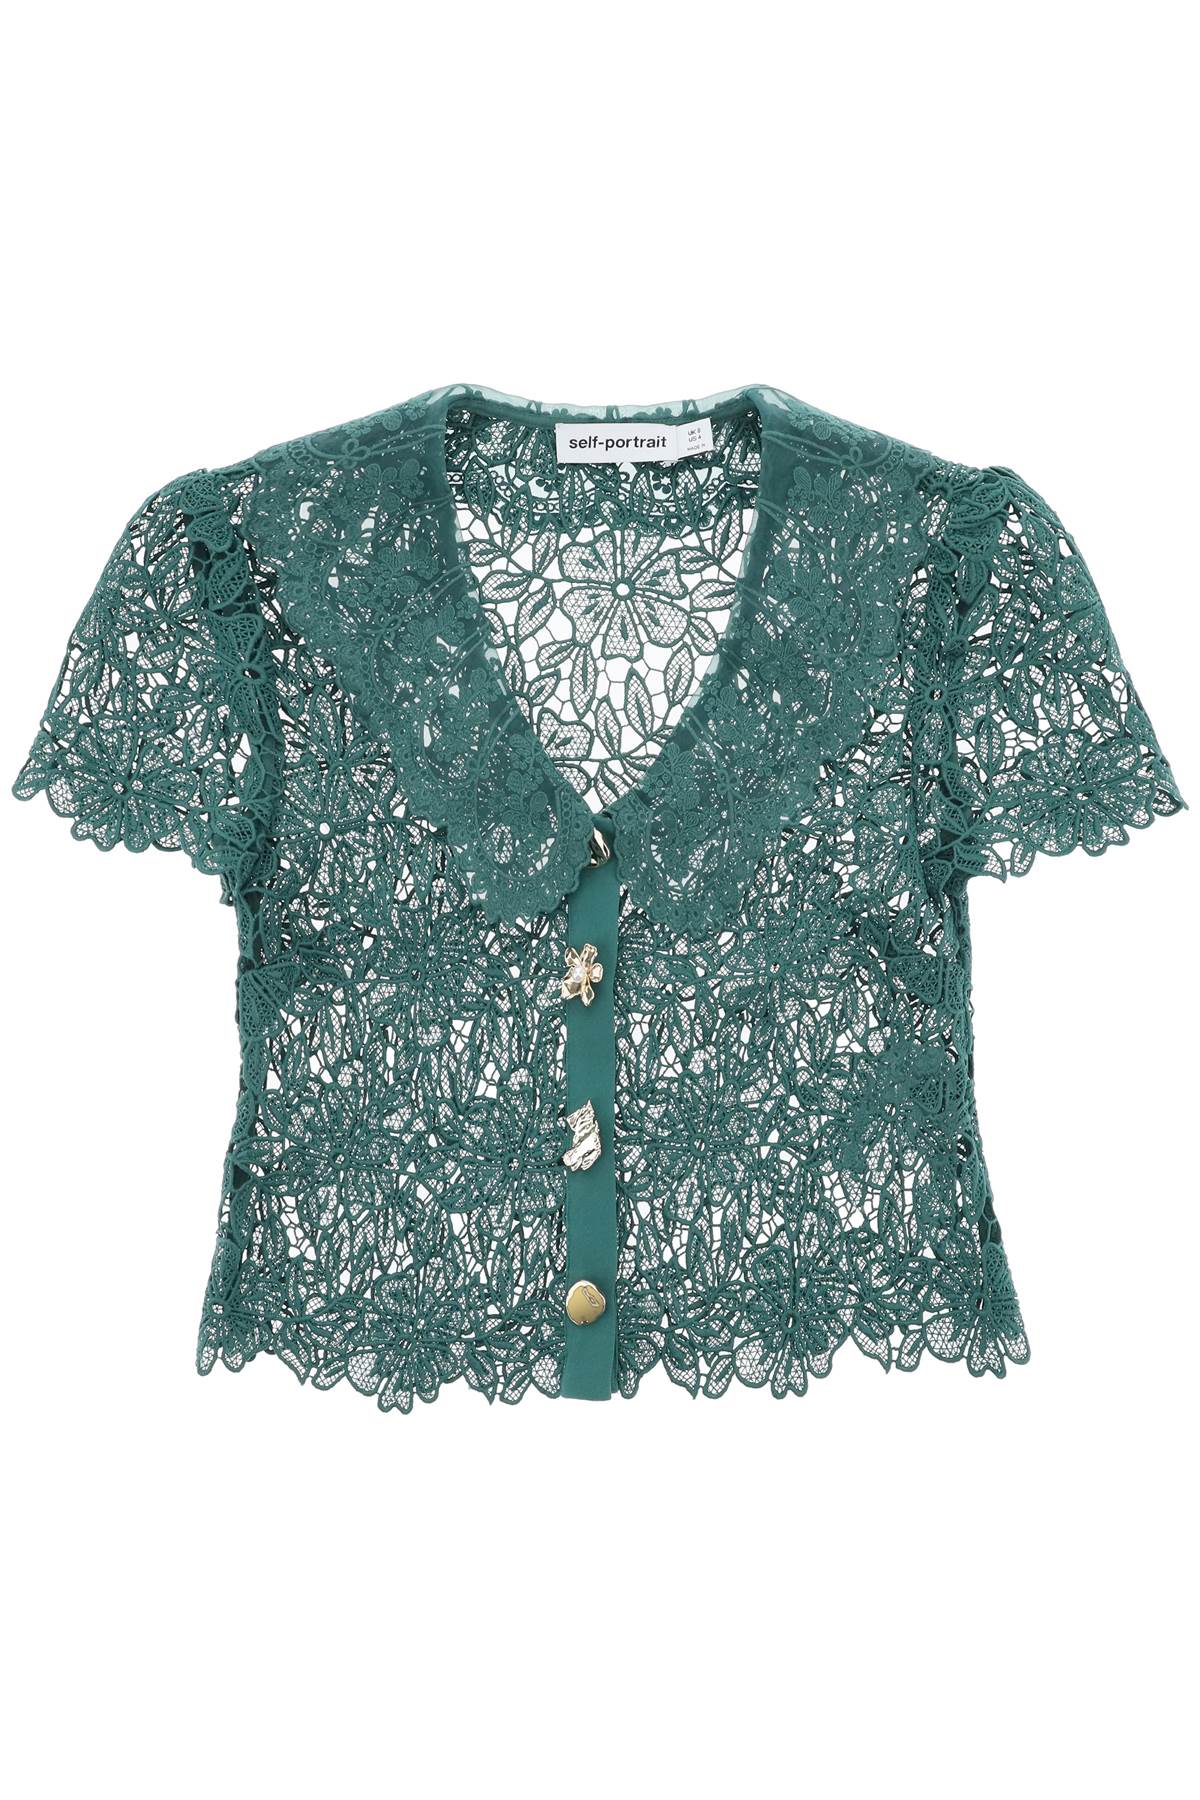 chelsea Lace Guipure Top With Collar